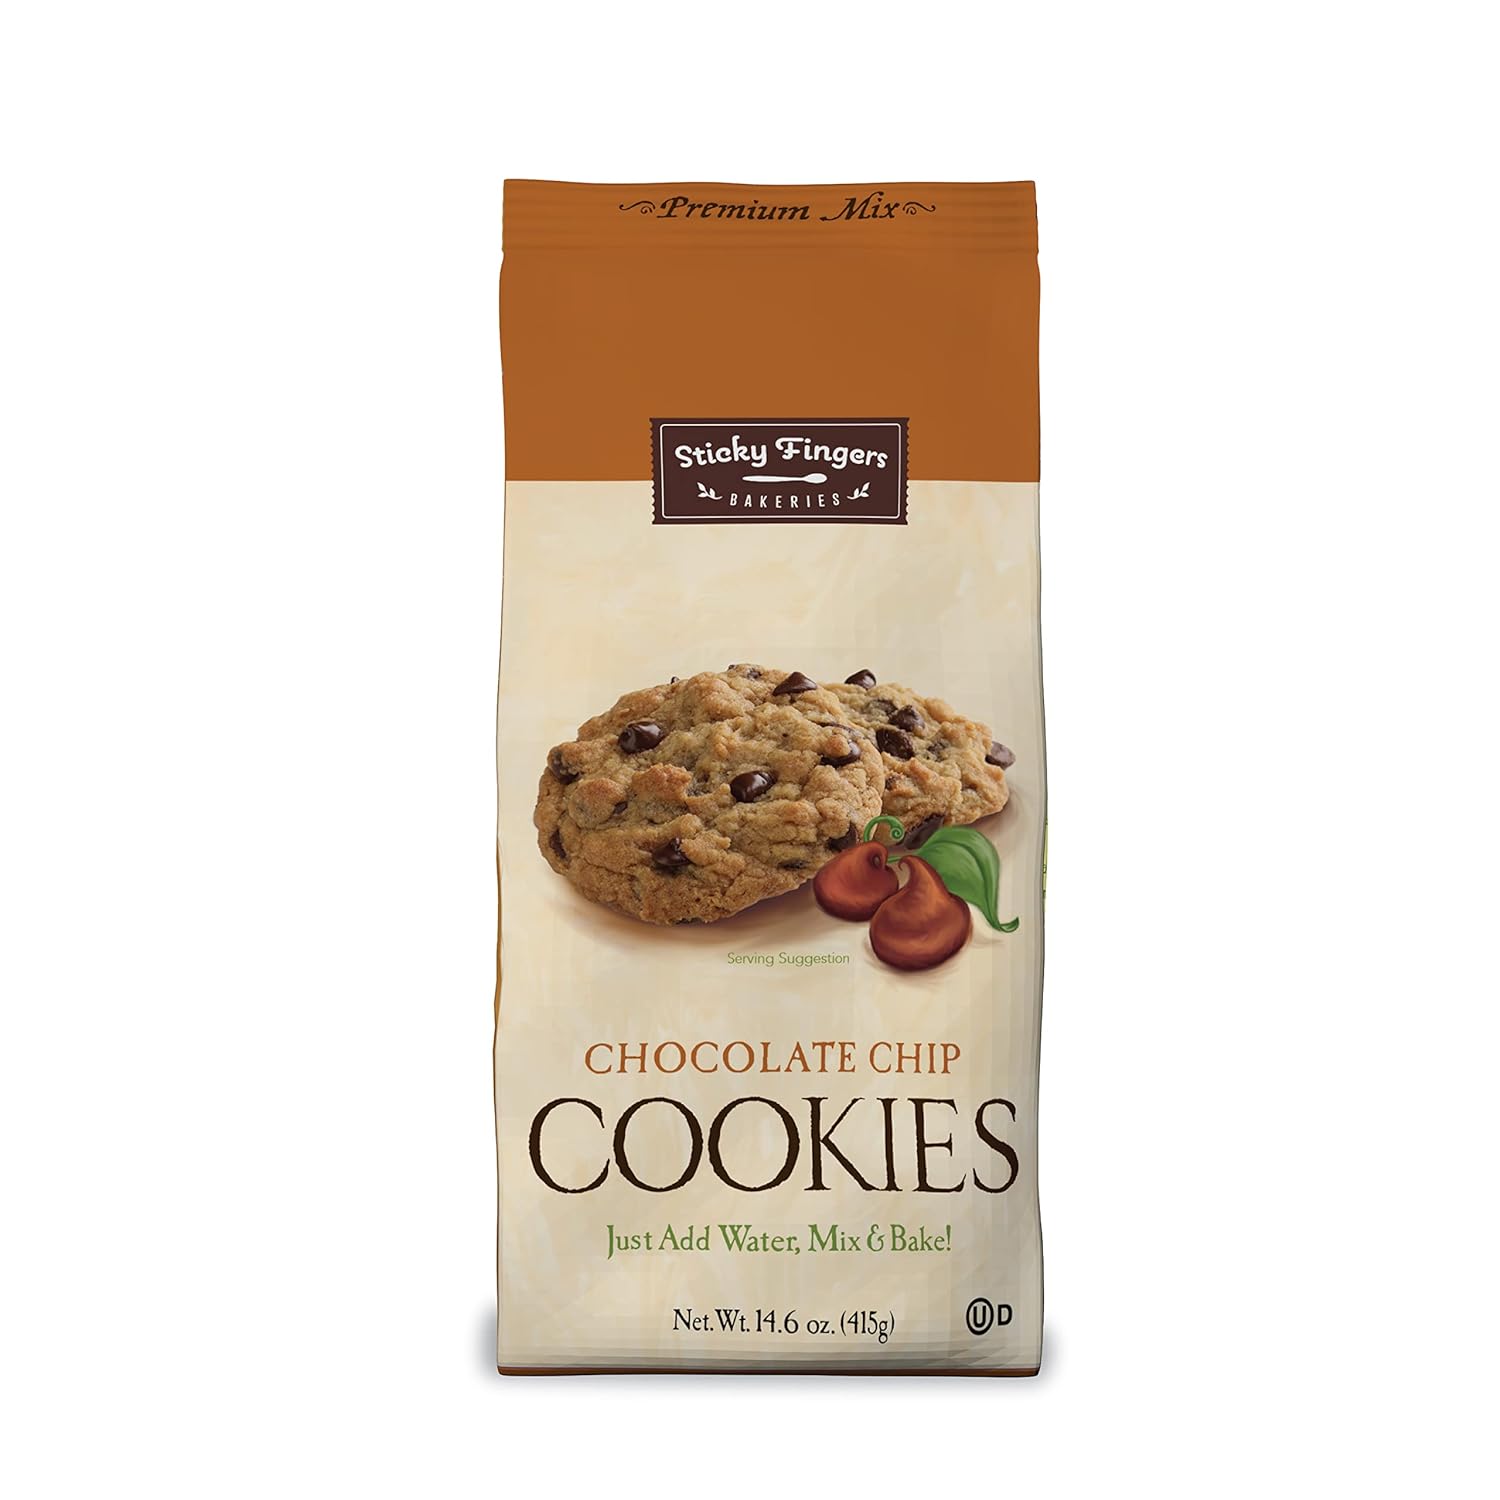 Chocolate Chip Cookie Mix by Sticky Fingers ¬Bakeries – Dry Baking Mix for Homemade Chocolate Chip Cookies, Made with Semi Sweet Chocolate Chips, Makes 16 Cookies Per Pack